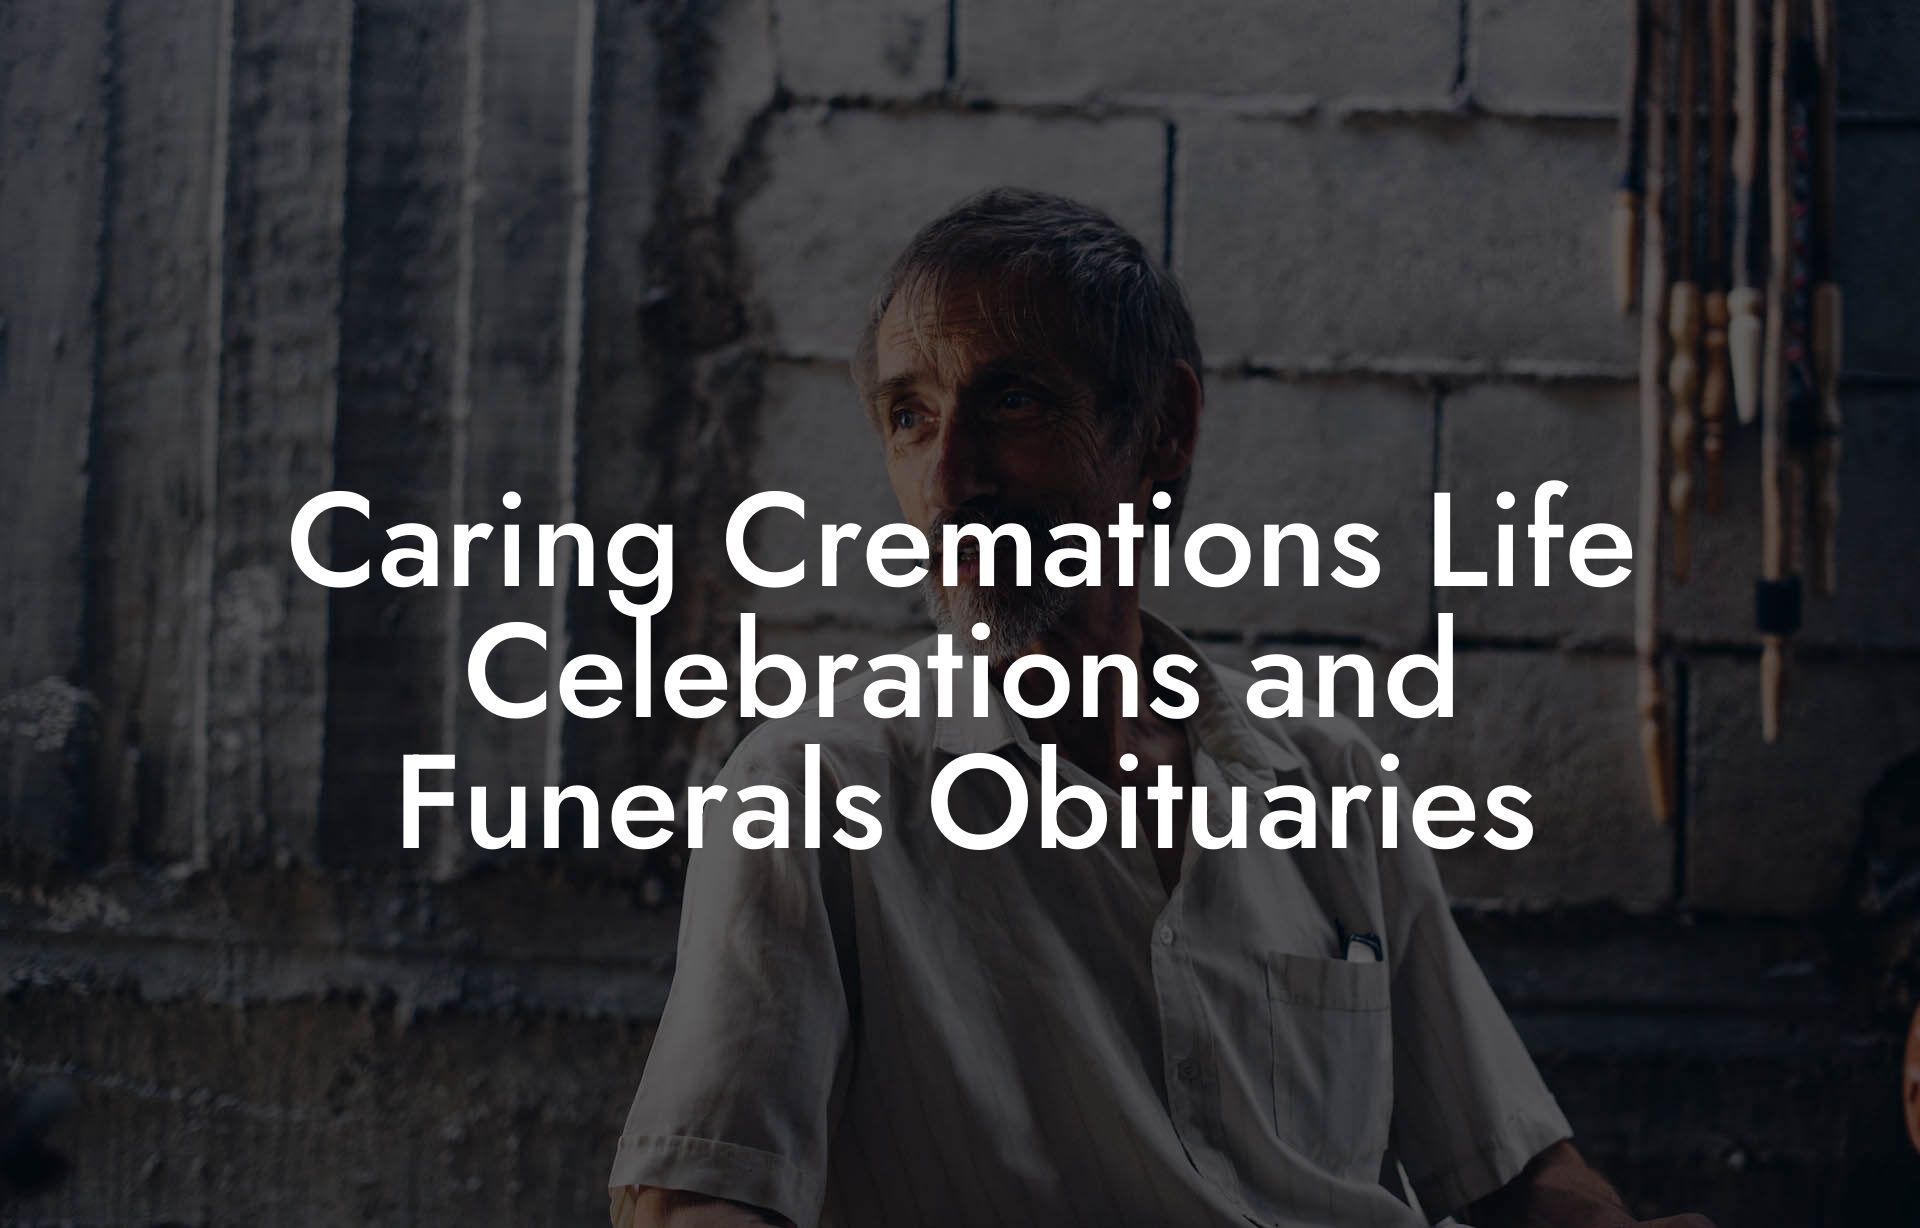 Caring Cremations Life Celebrations and Funerals Obituaries